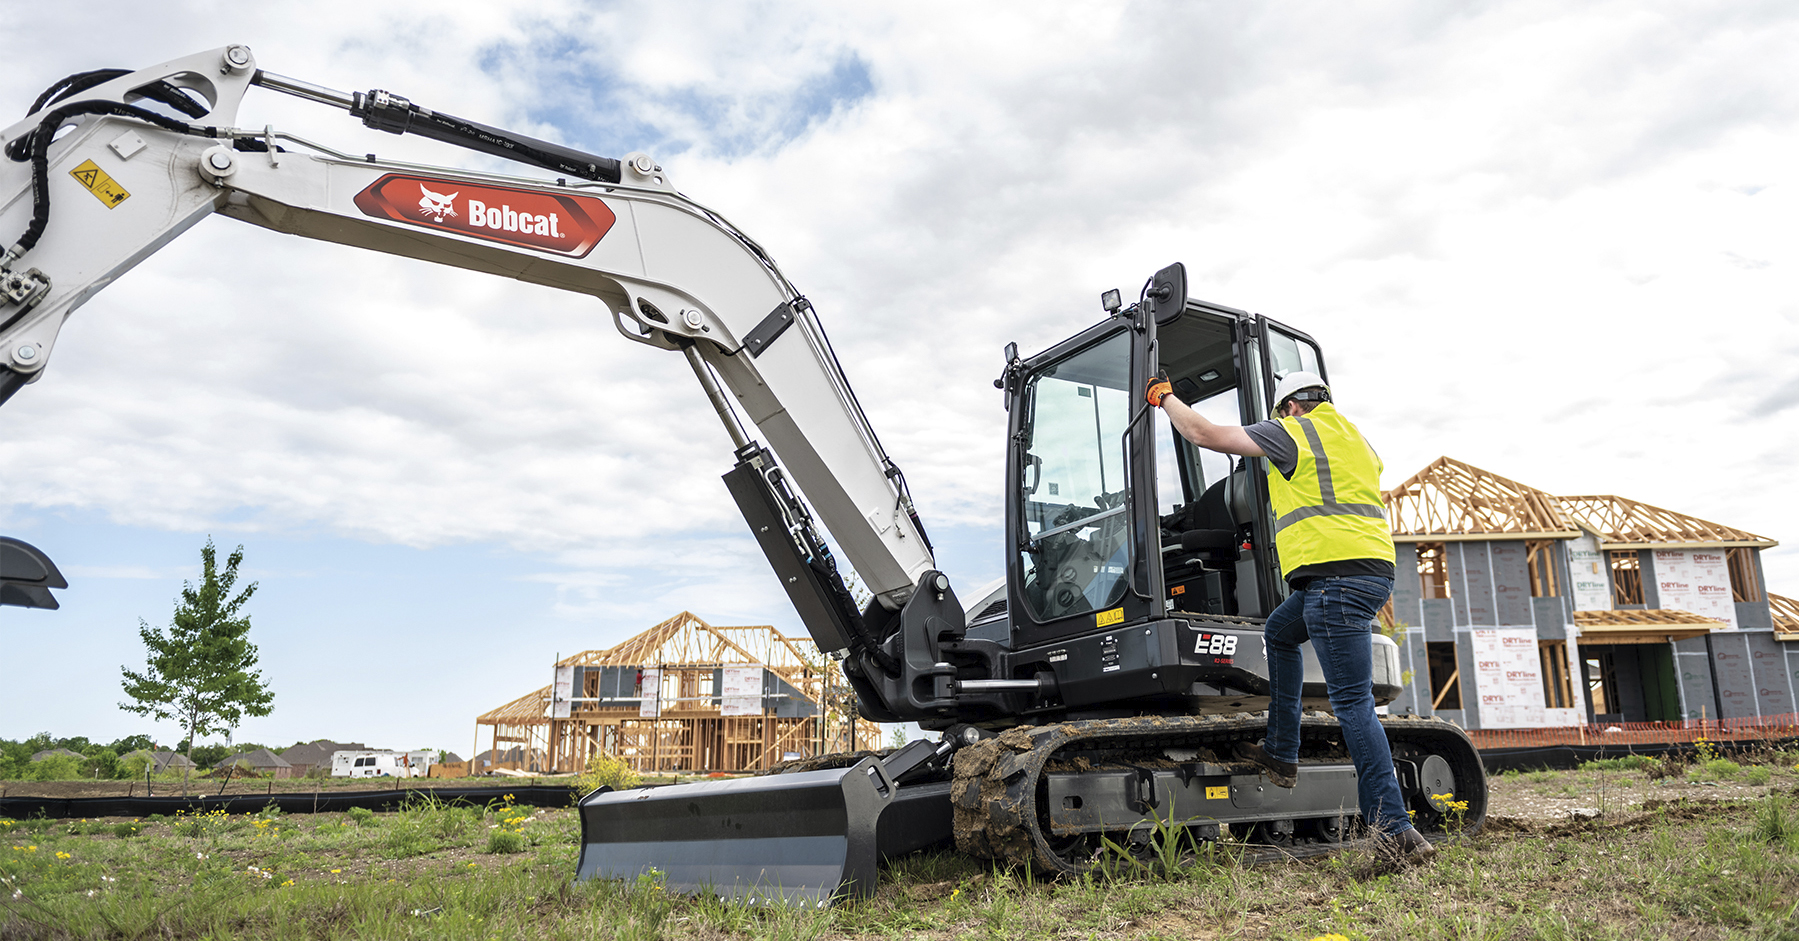 4 Excavator Safety Tips to Follow While on the Job